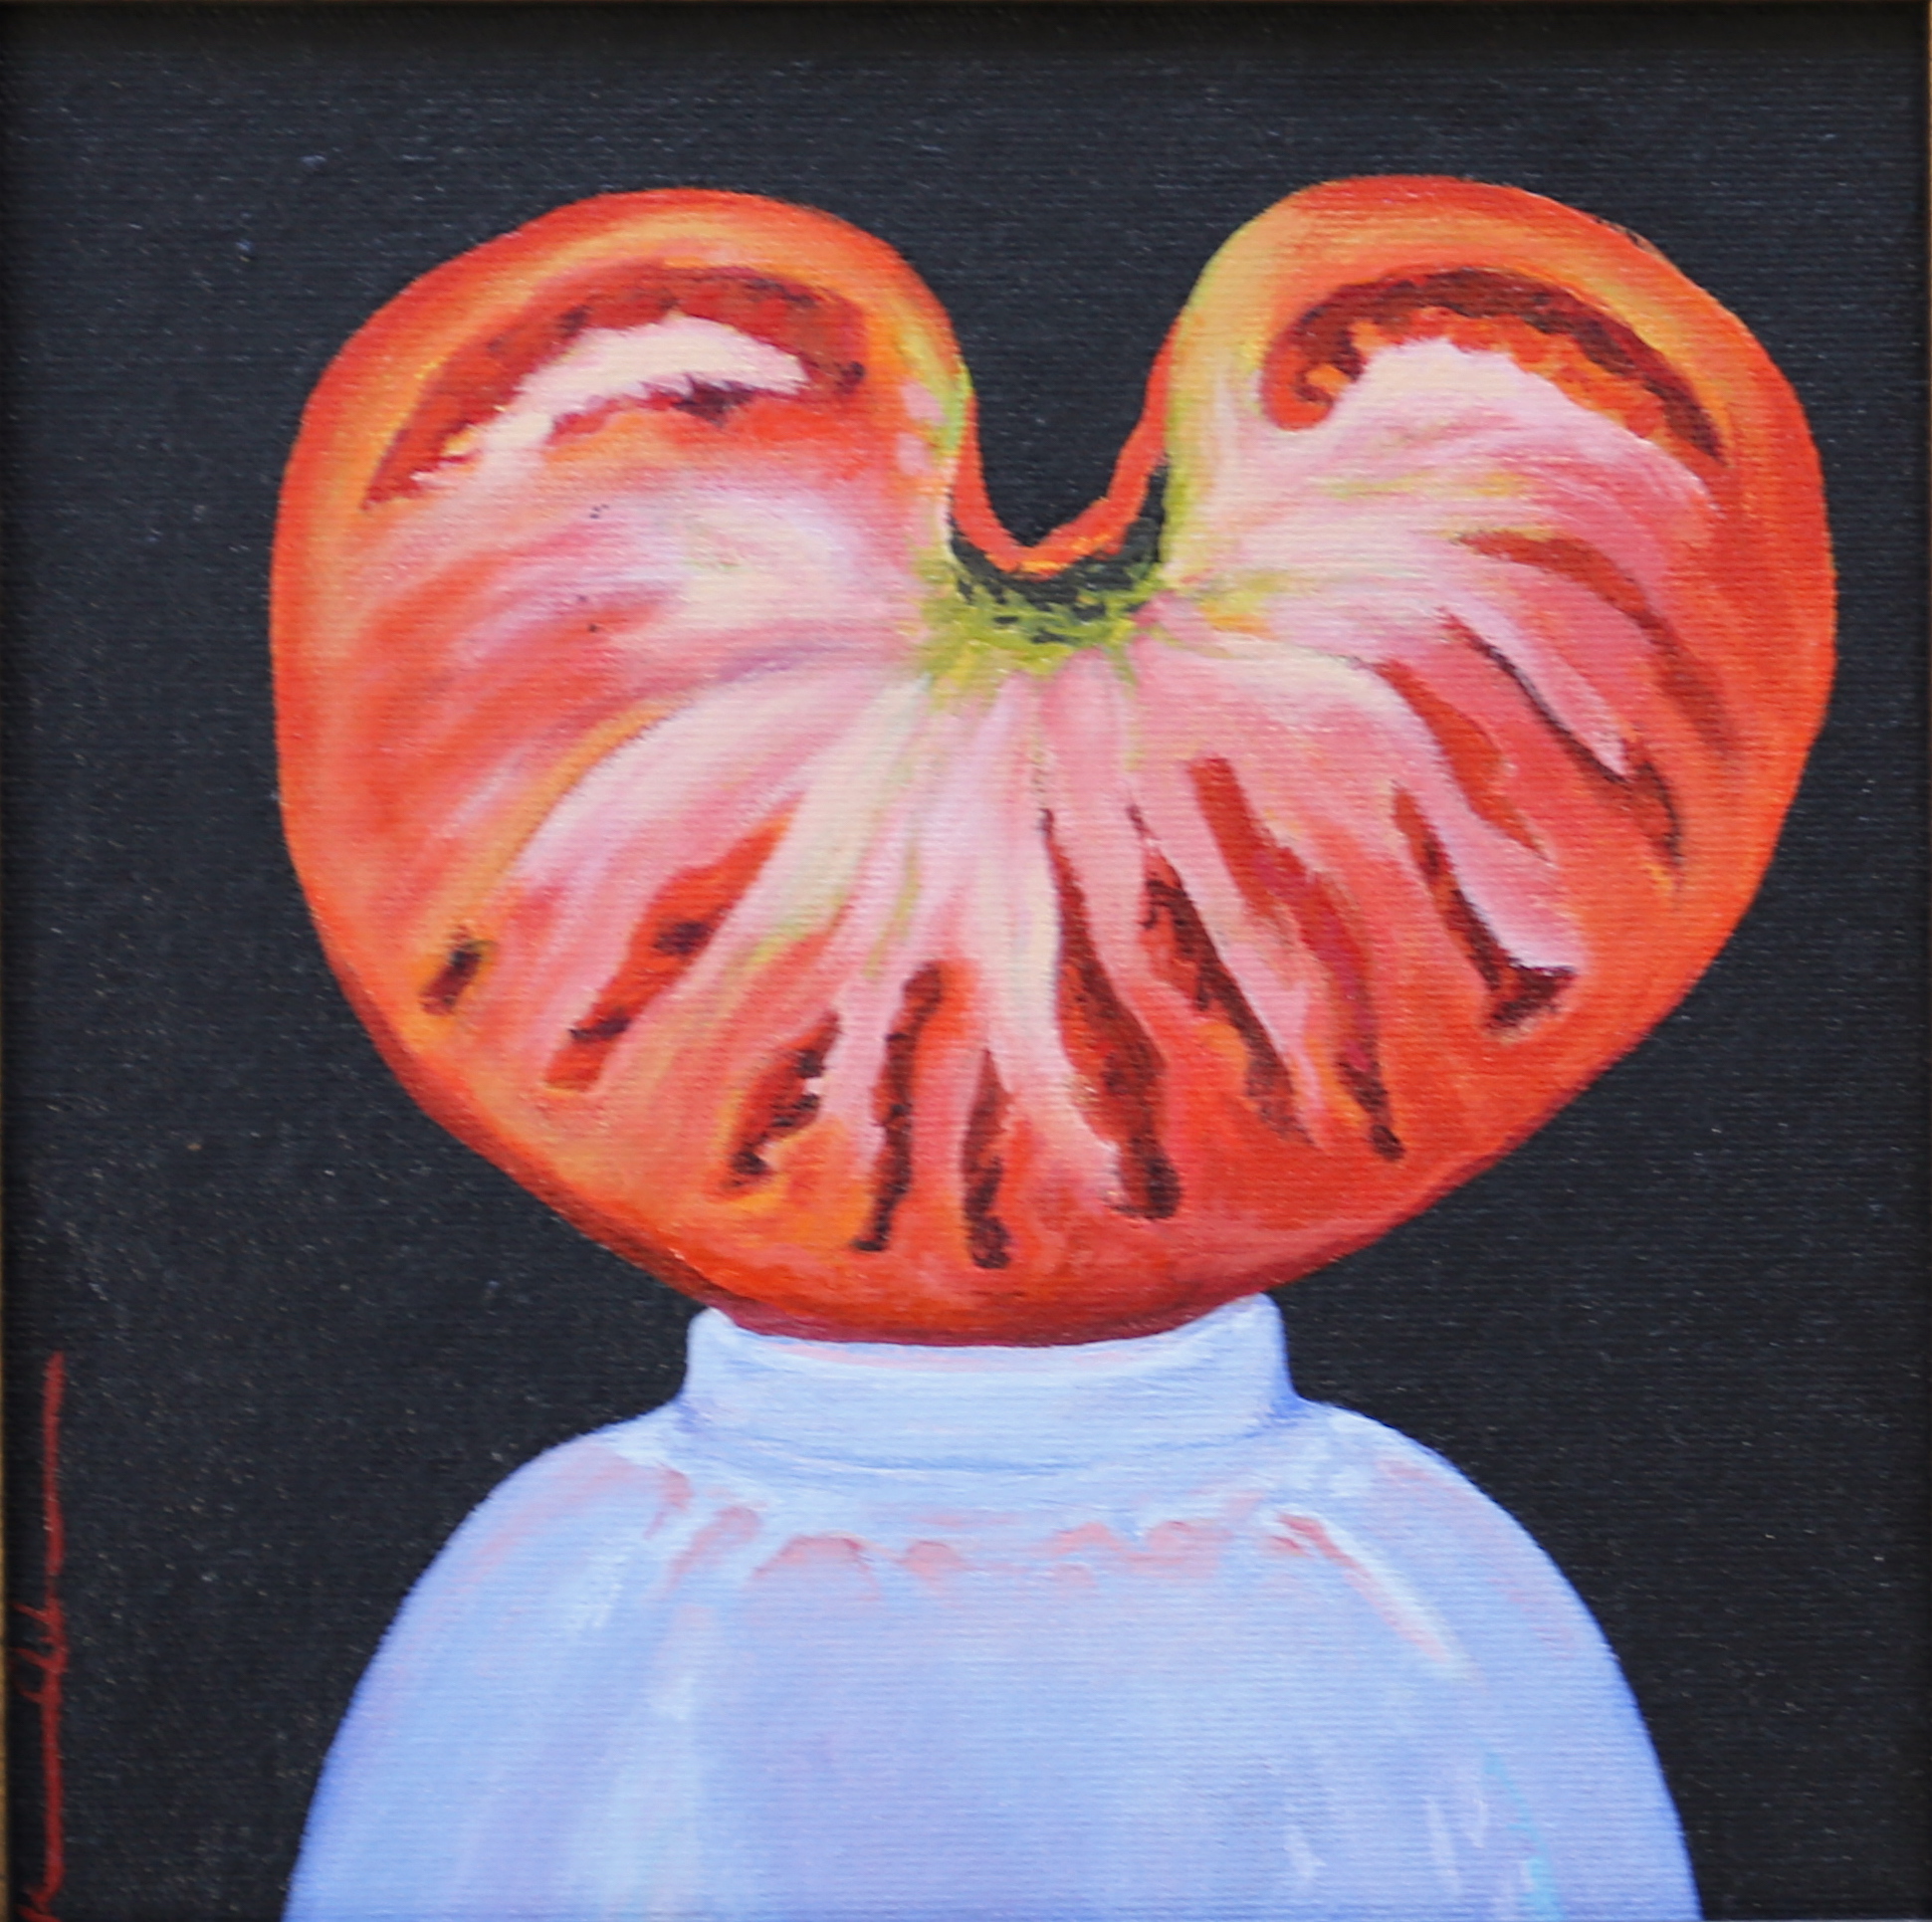 1/2 Red Tomato 8 X 8 oil on panel (sold)